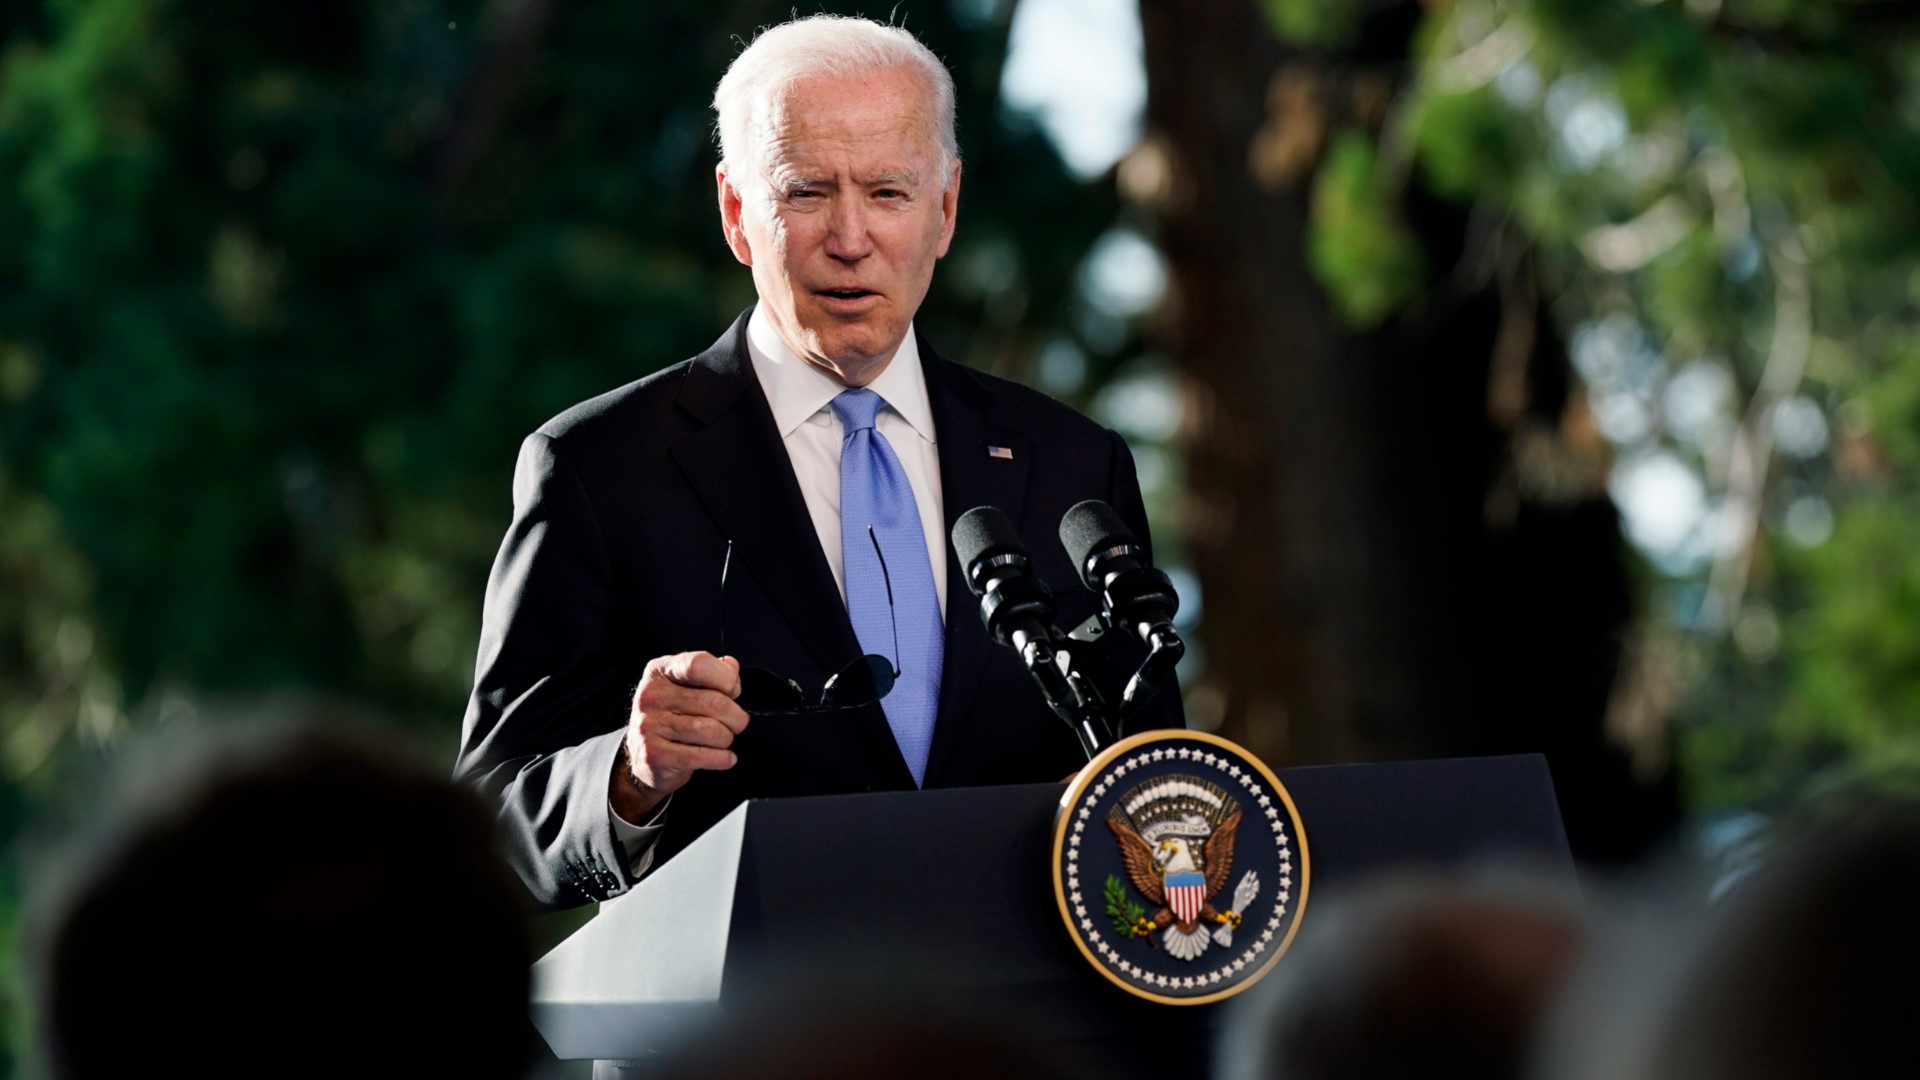 The Verify team looked into a claim that Biden has had more confirmed judges at this point in his presidency than any past administration in past 50 years.